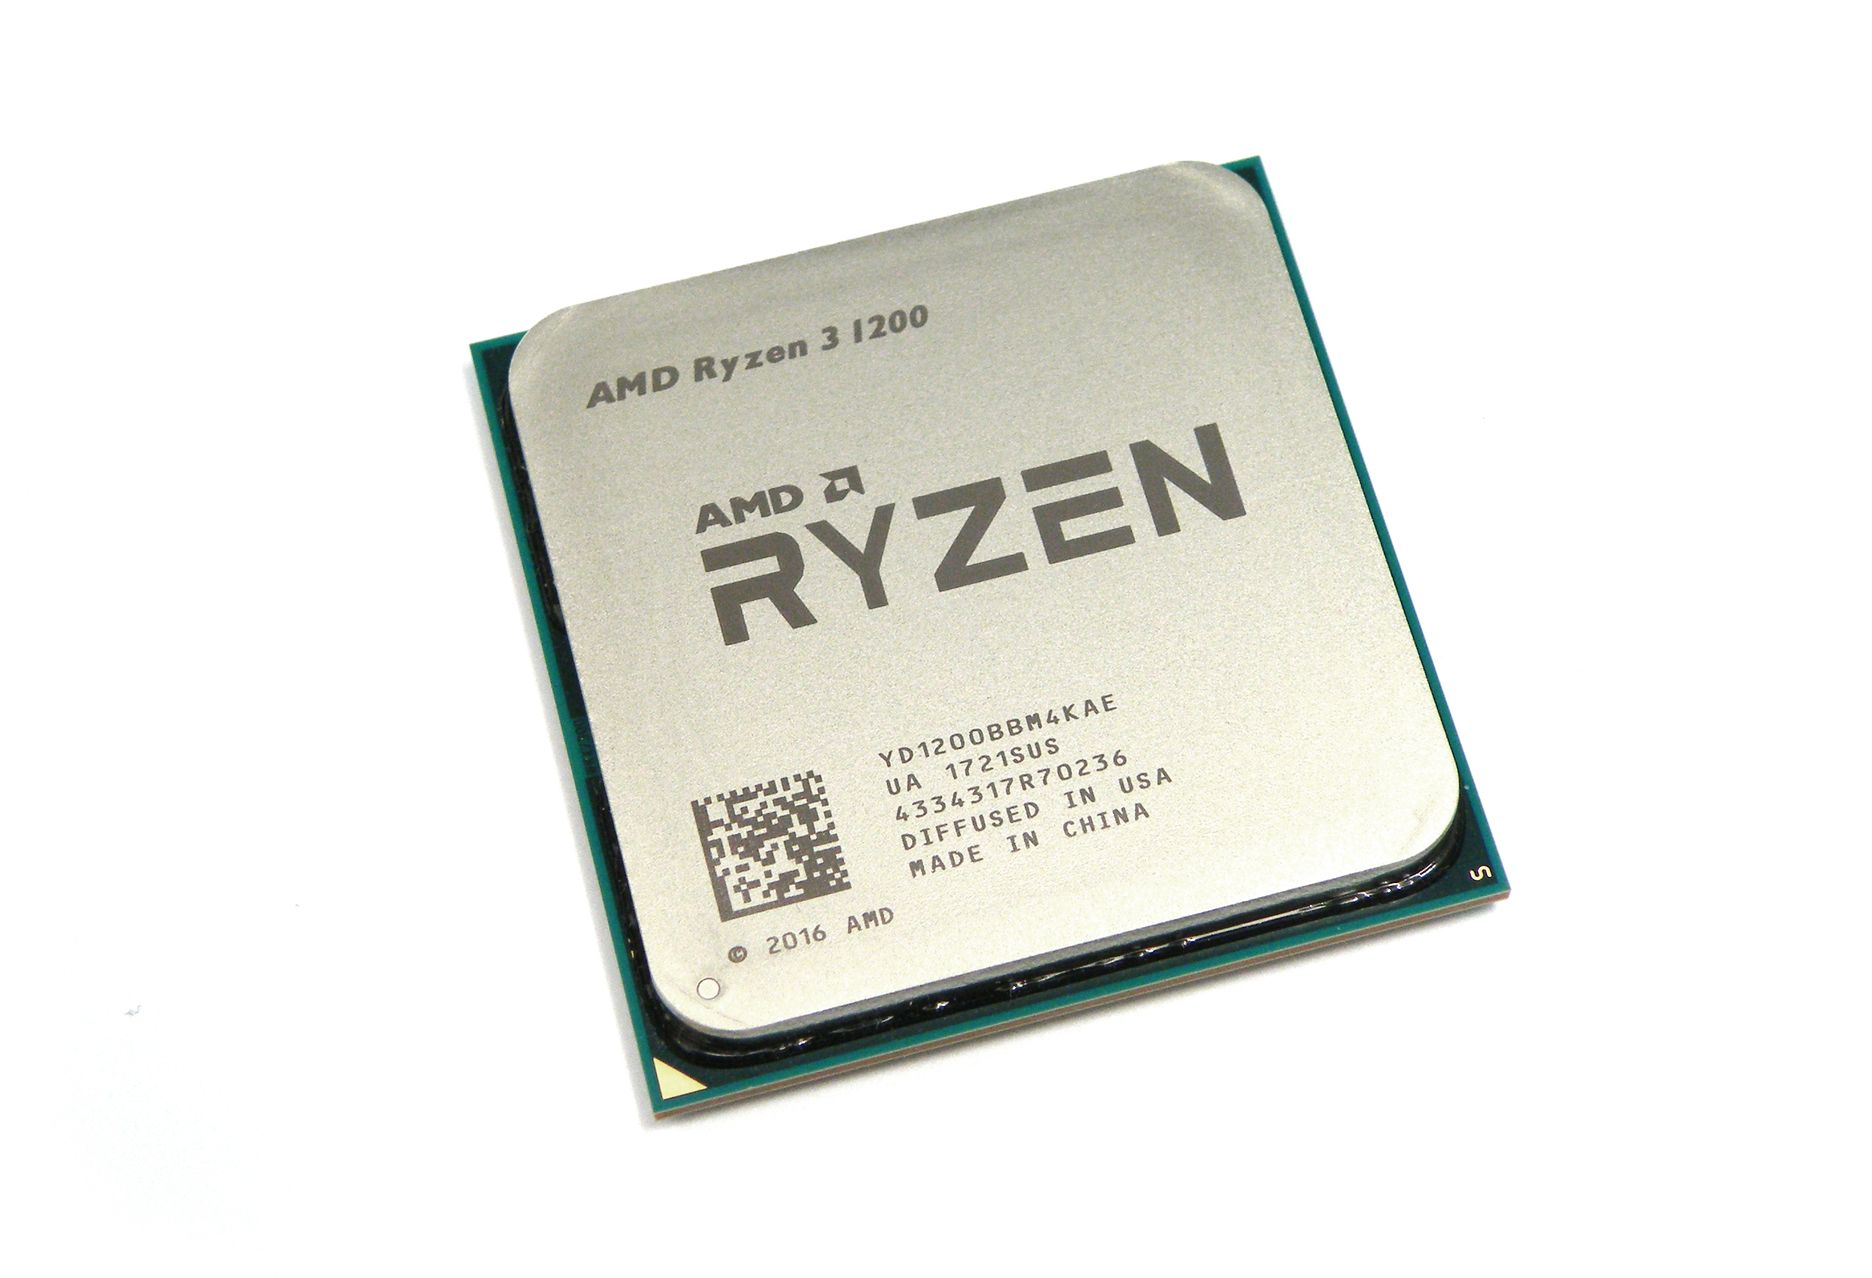 AMD Ryzen 3 1200 AF 3.1GHz 8 MB with Wraith Stealth Cooler